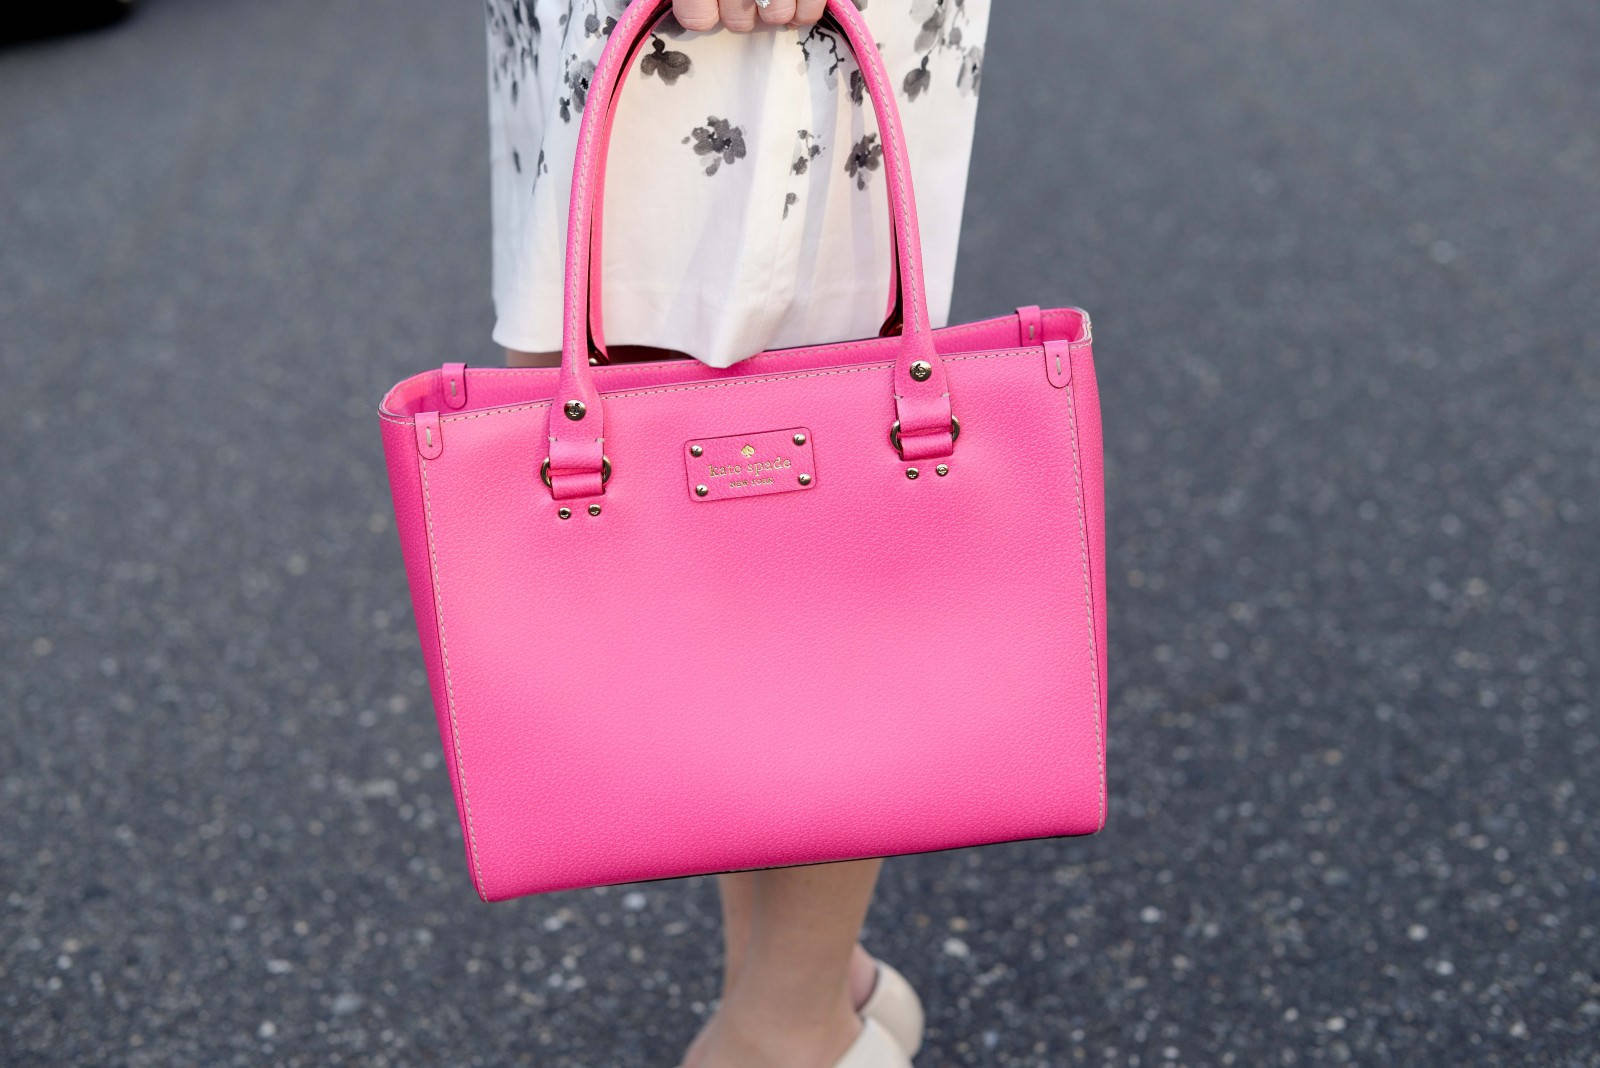 Maggy London Dresses, Pink Totes and Pearls (...and a little life update)